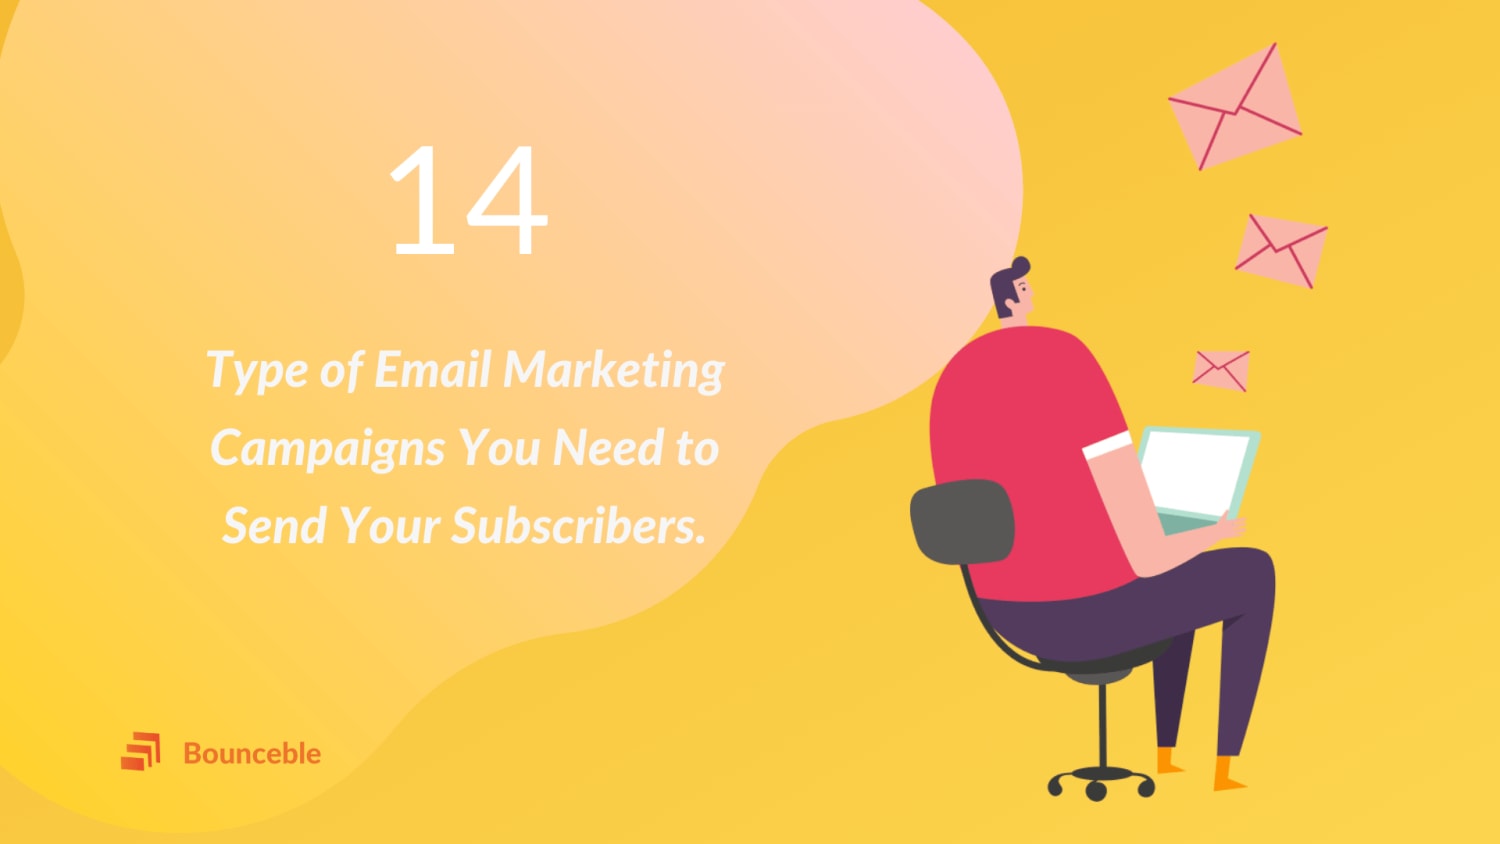 14 Type of Email Marketing Campaigns Need to Send Your Subscribers